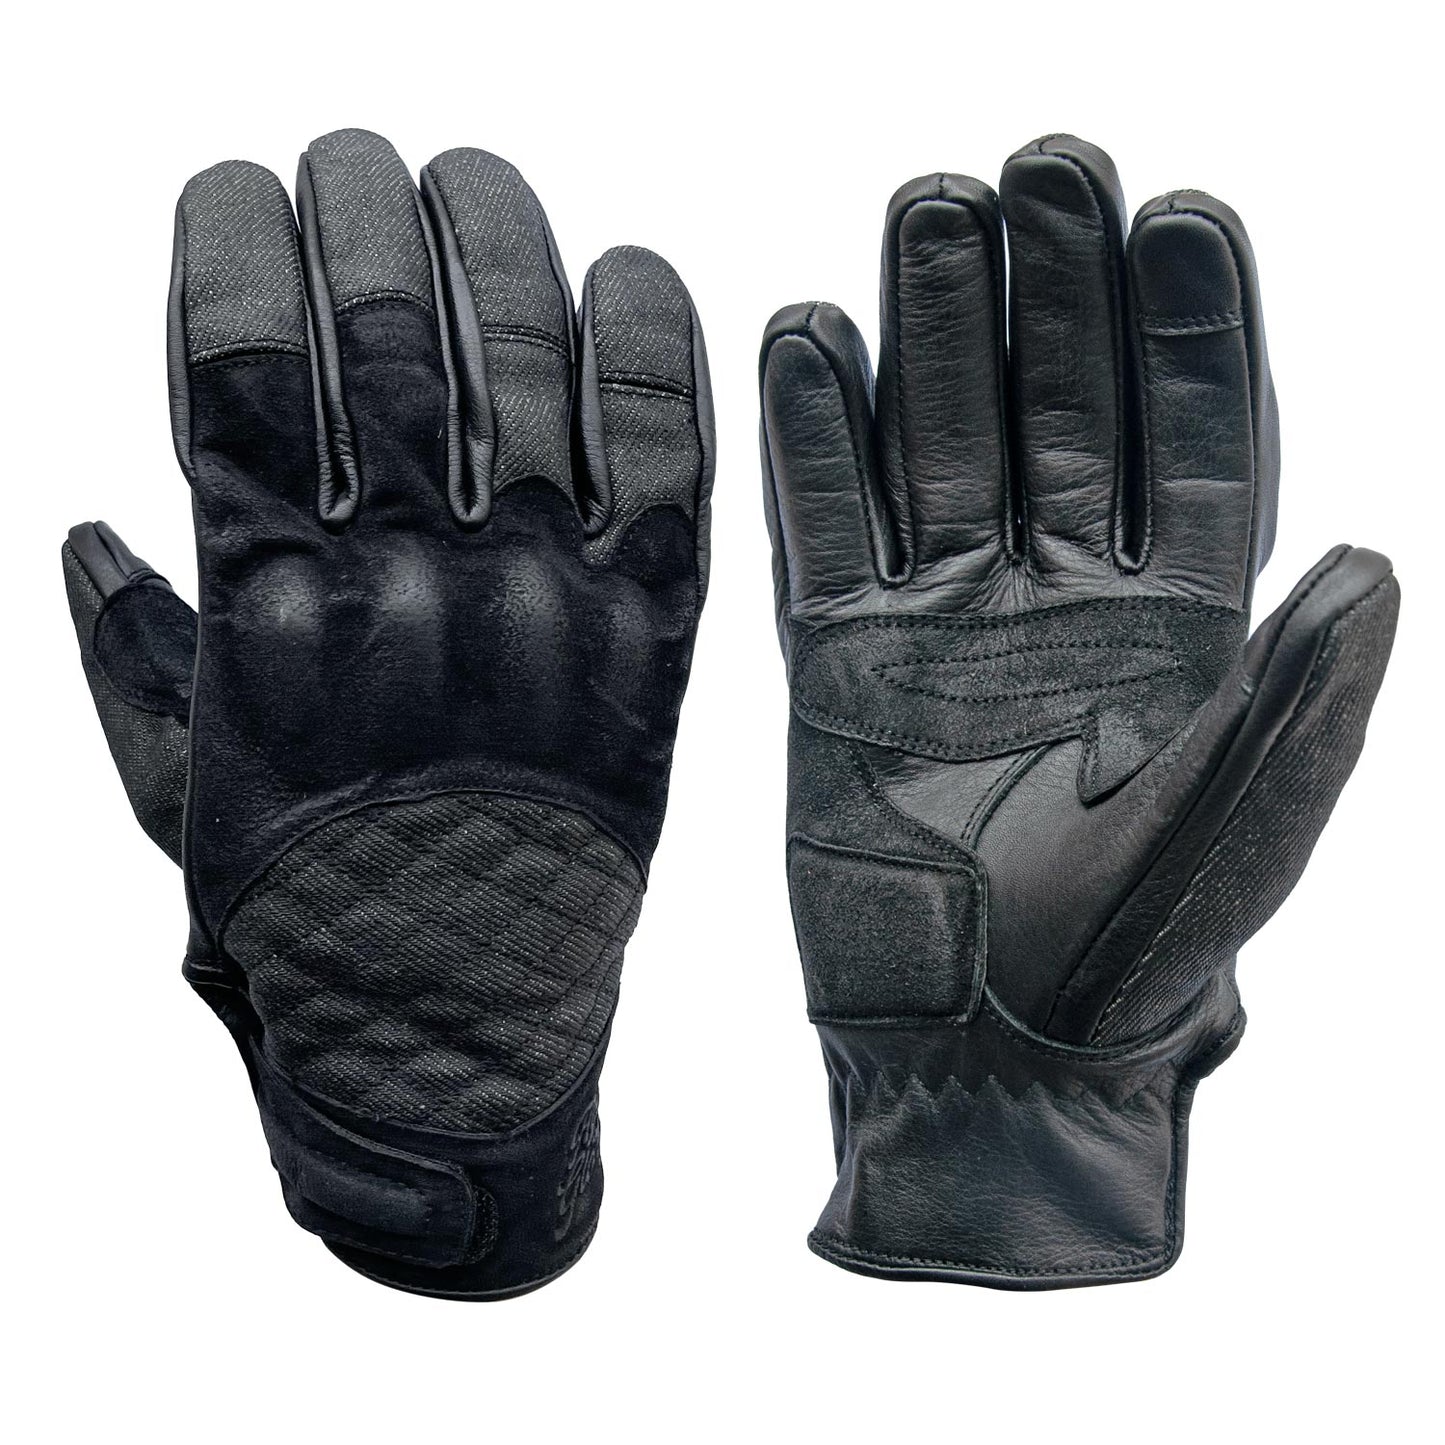 Age of Glory Shifter Leather CE Gloves - Denim/Black